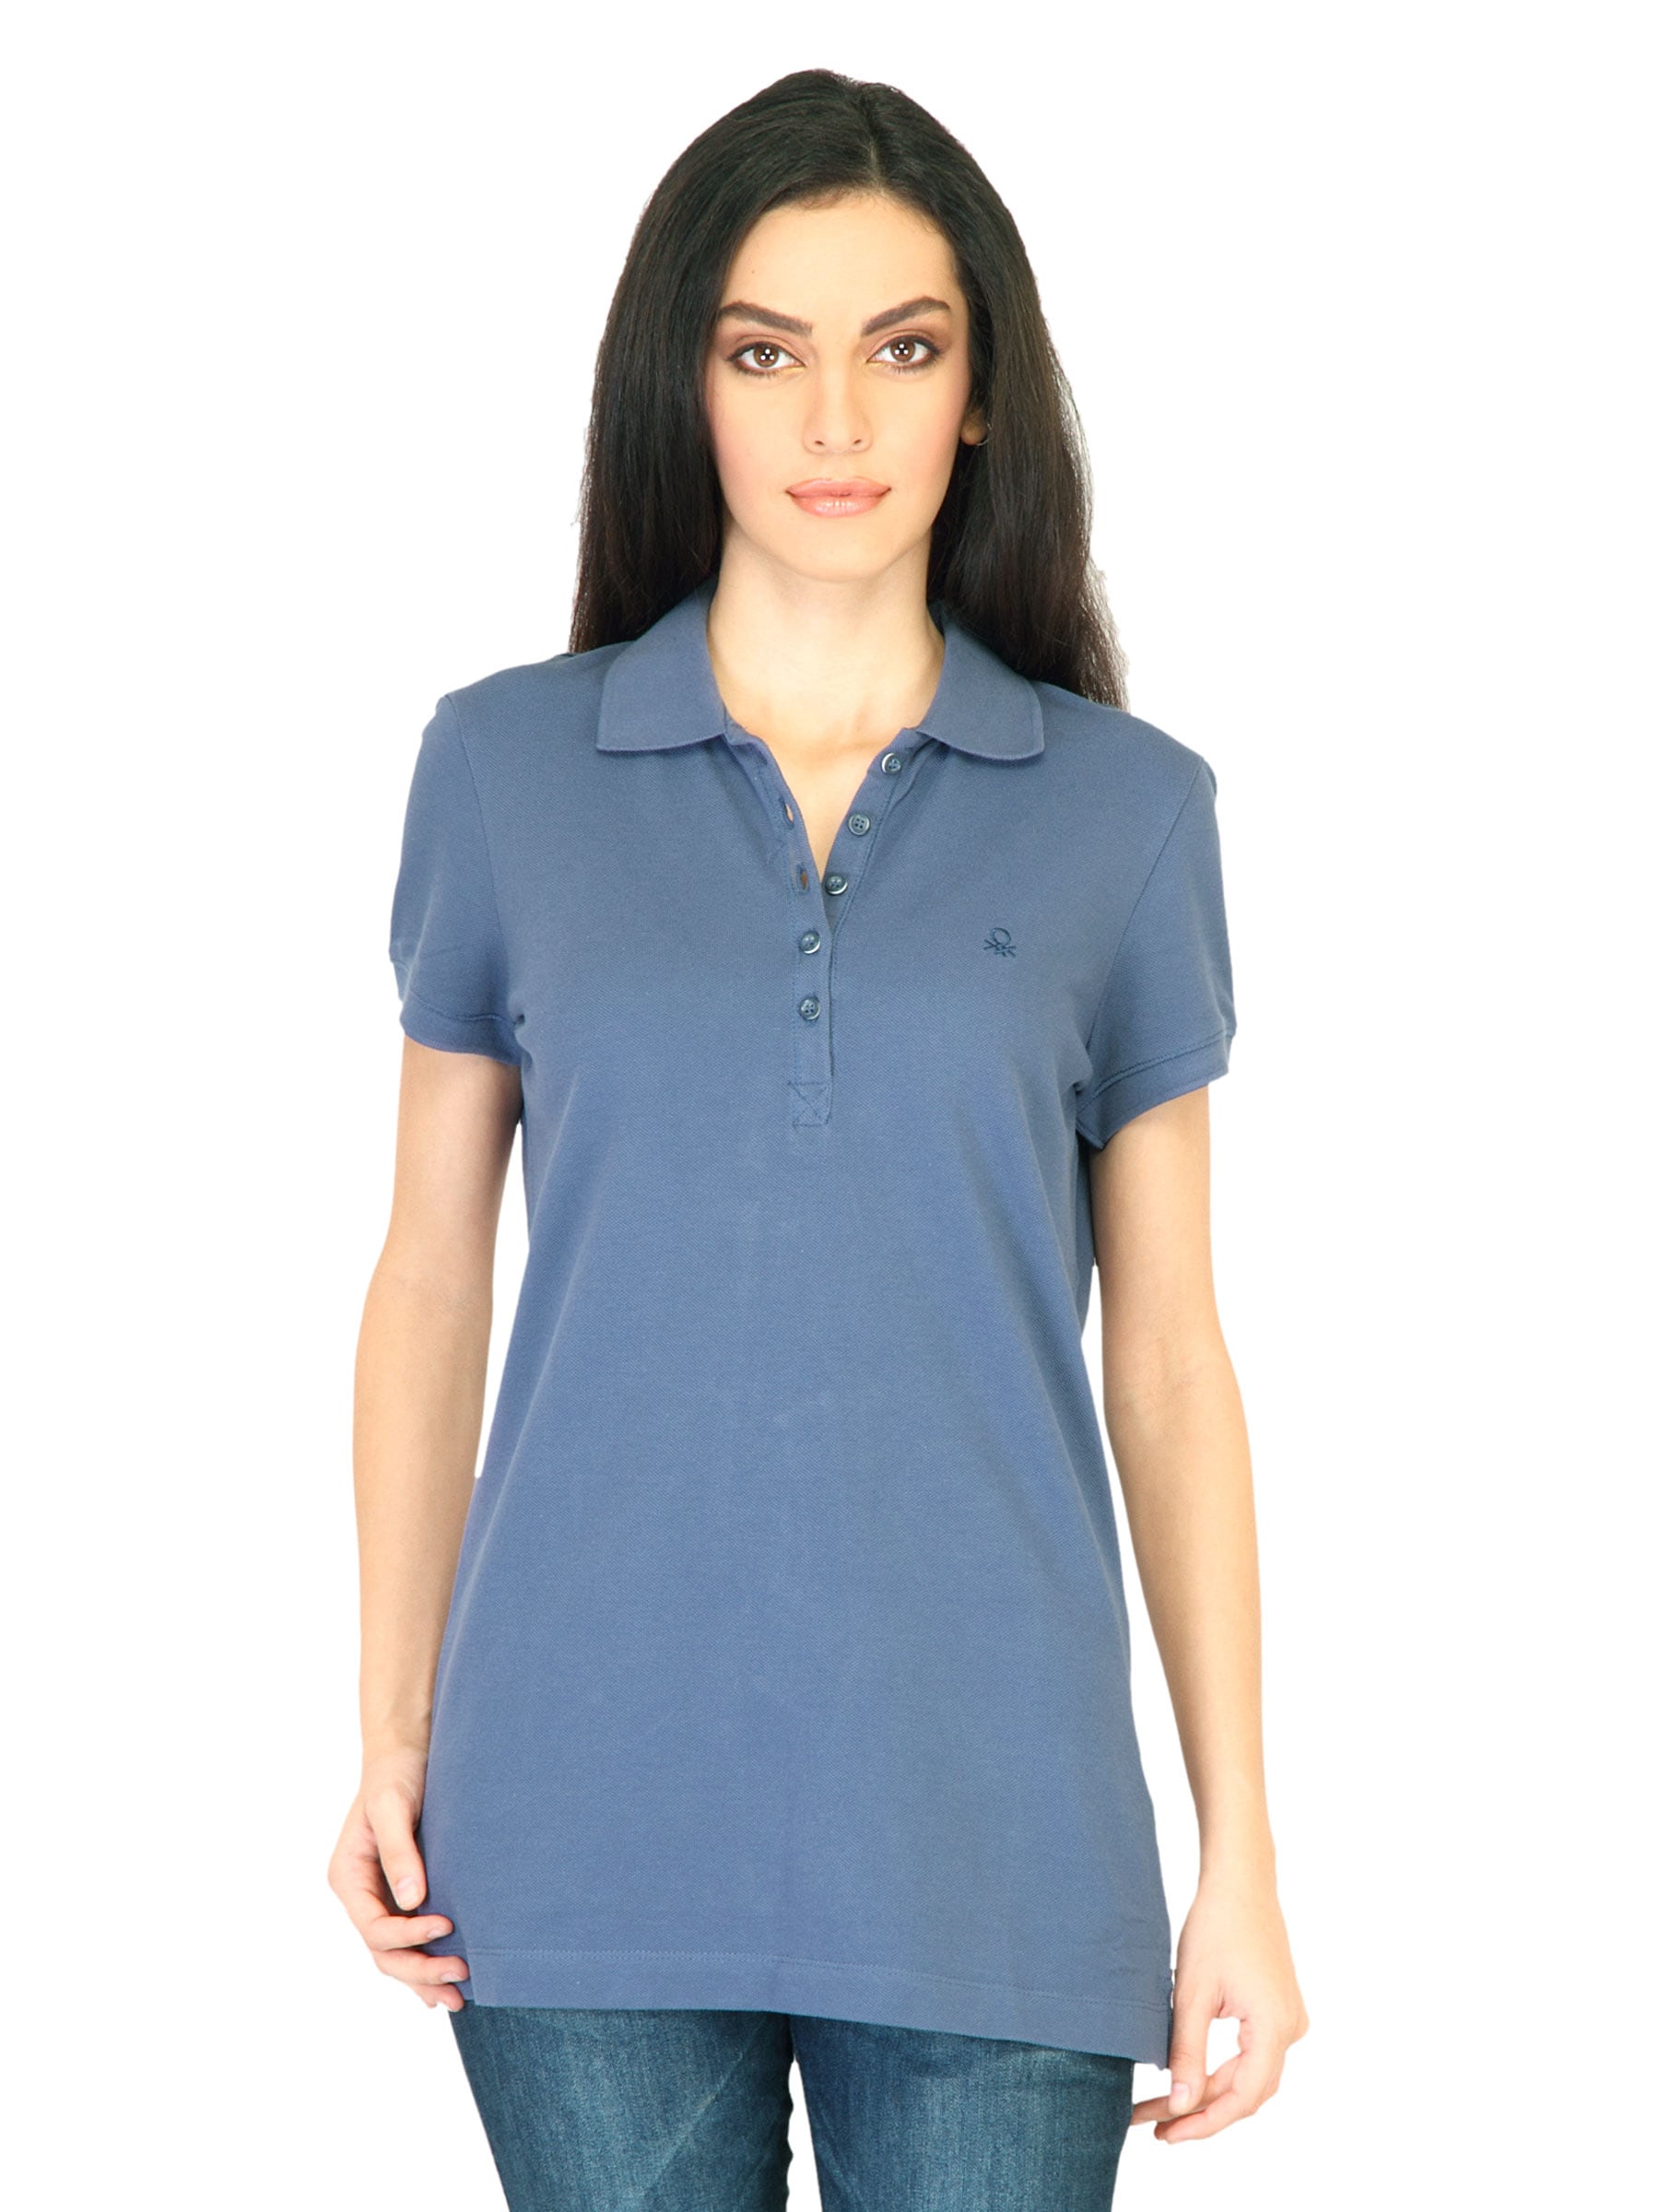 United Colors of Benetton Women Solid Blue Tshirts